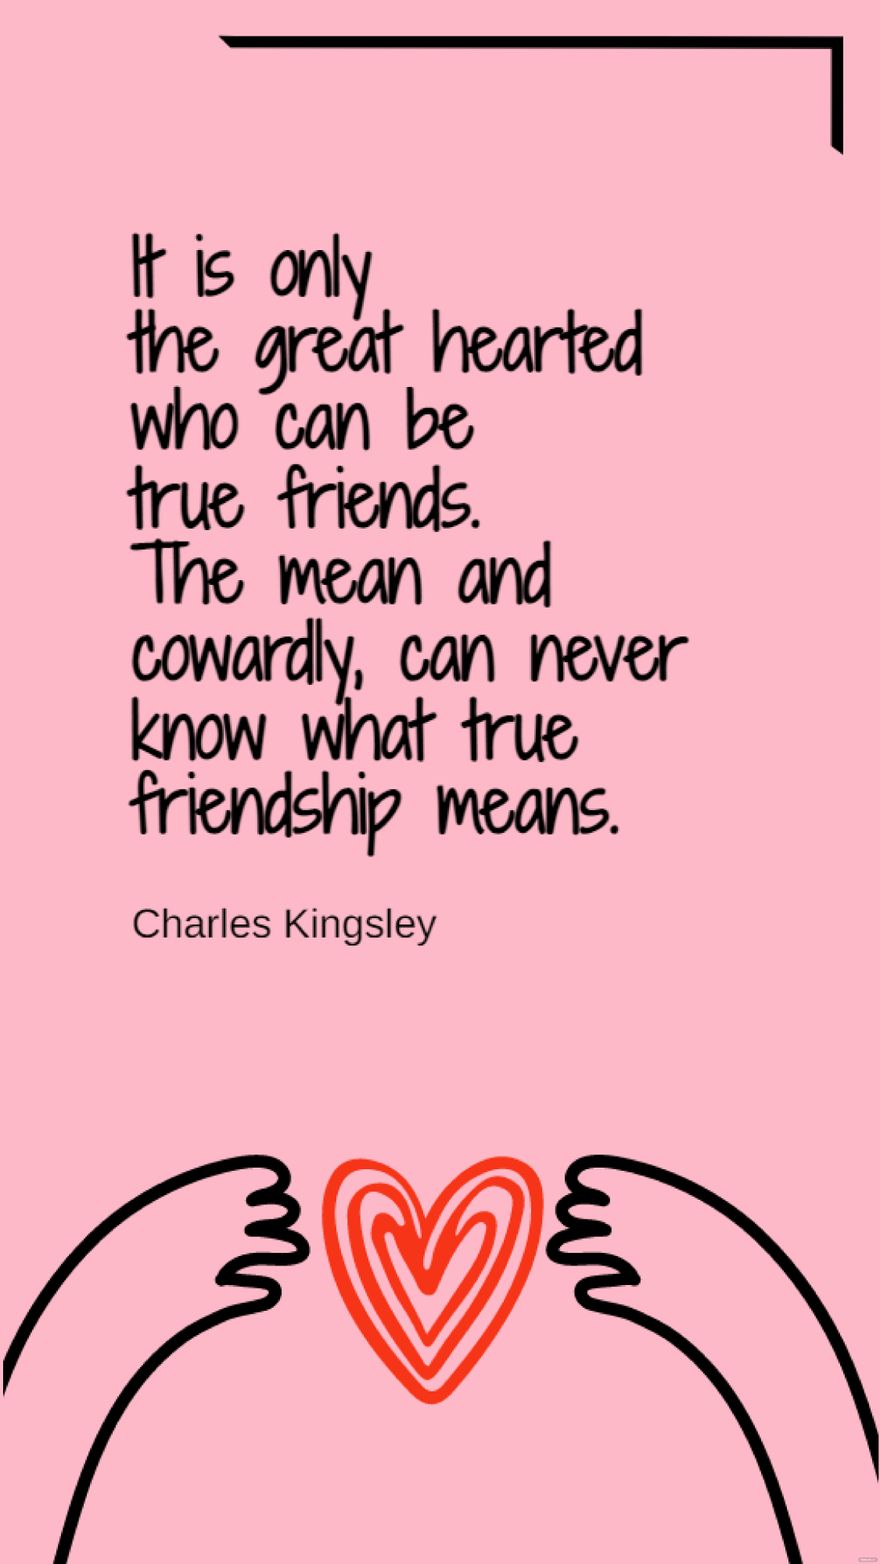 Charles Kingsley - It is only the great hearted who can be true friends. The mean and cowardly, can never know what true friendship means. in JPG